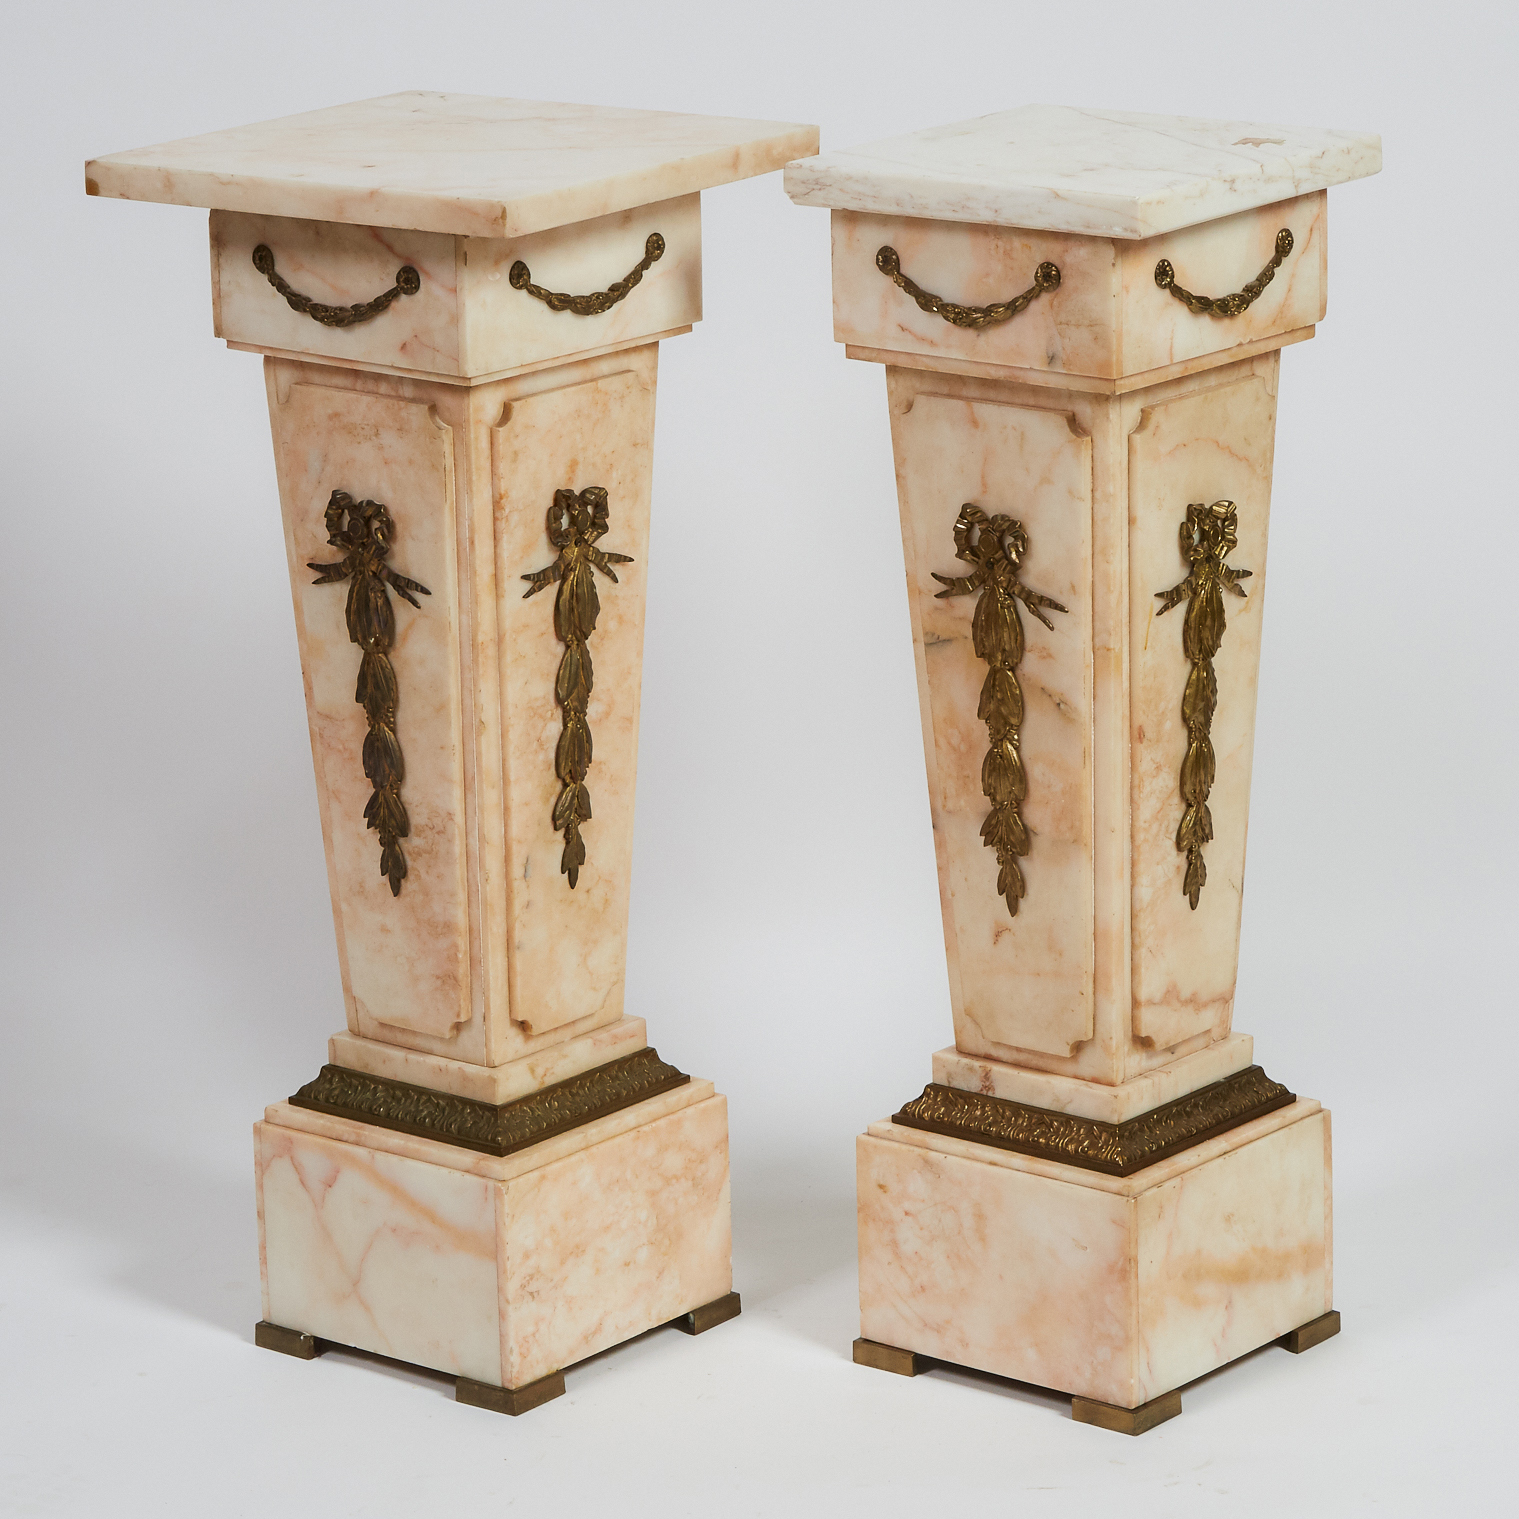 Pair of Louis XVI Style Ormolu Mounted Marble Tapered Column Form Pedestals, early 20th century